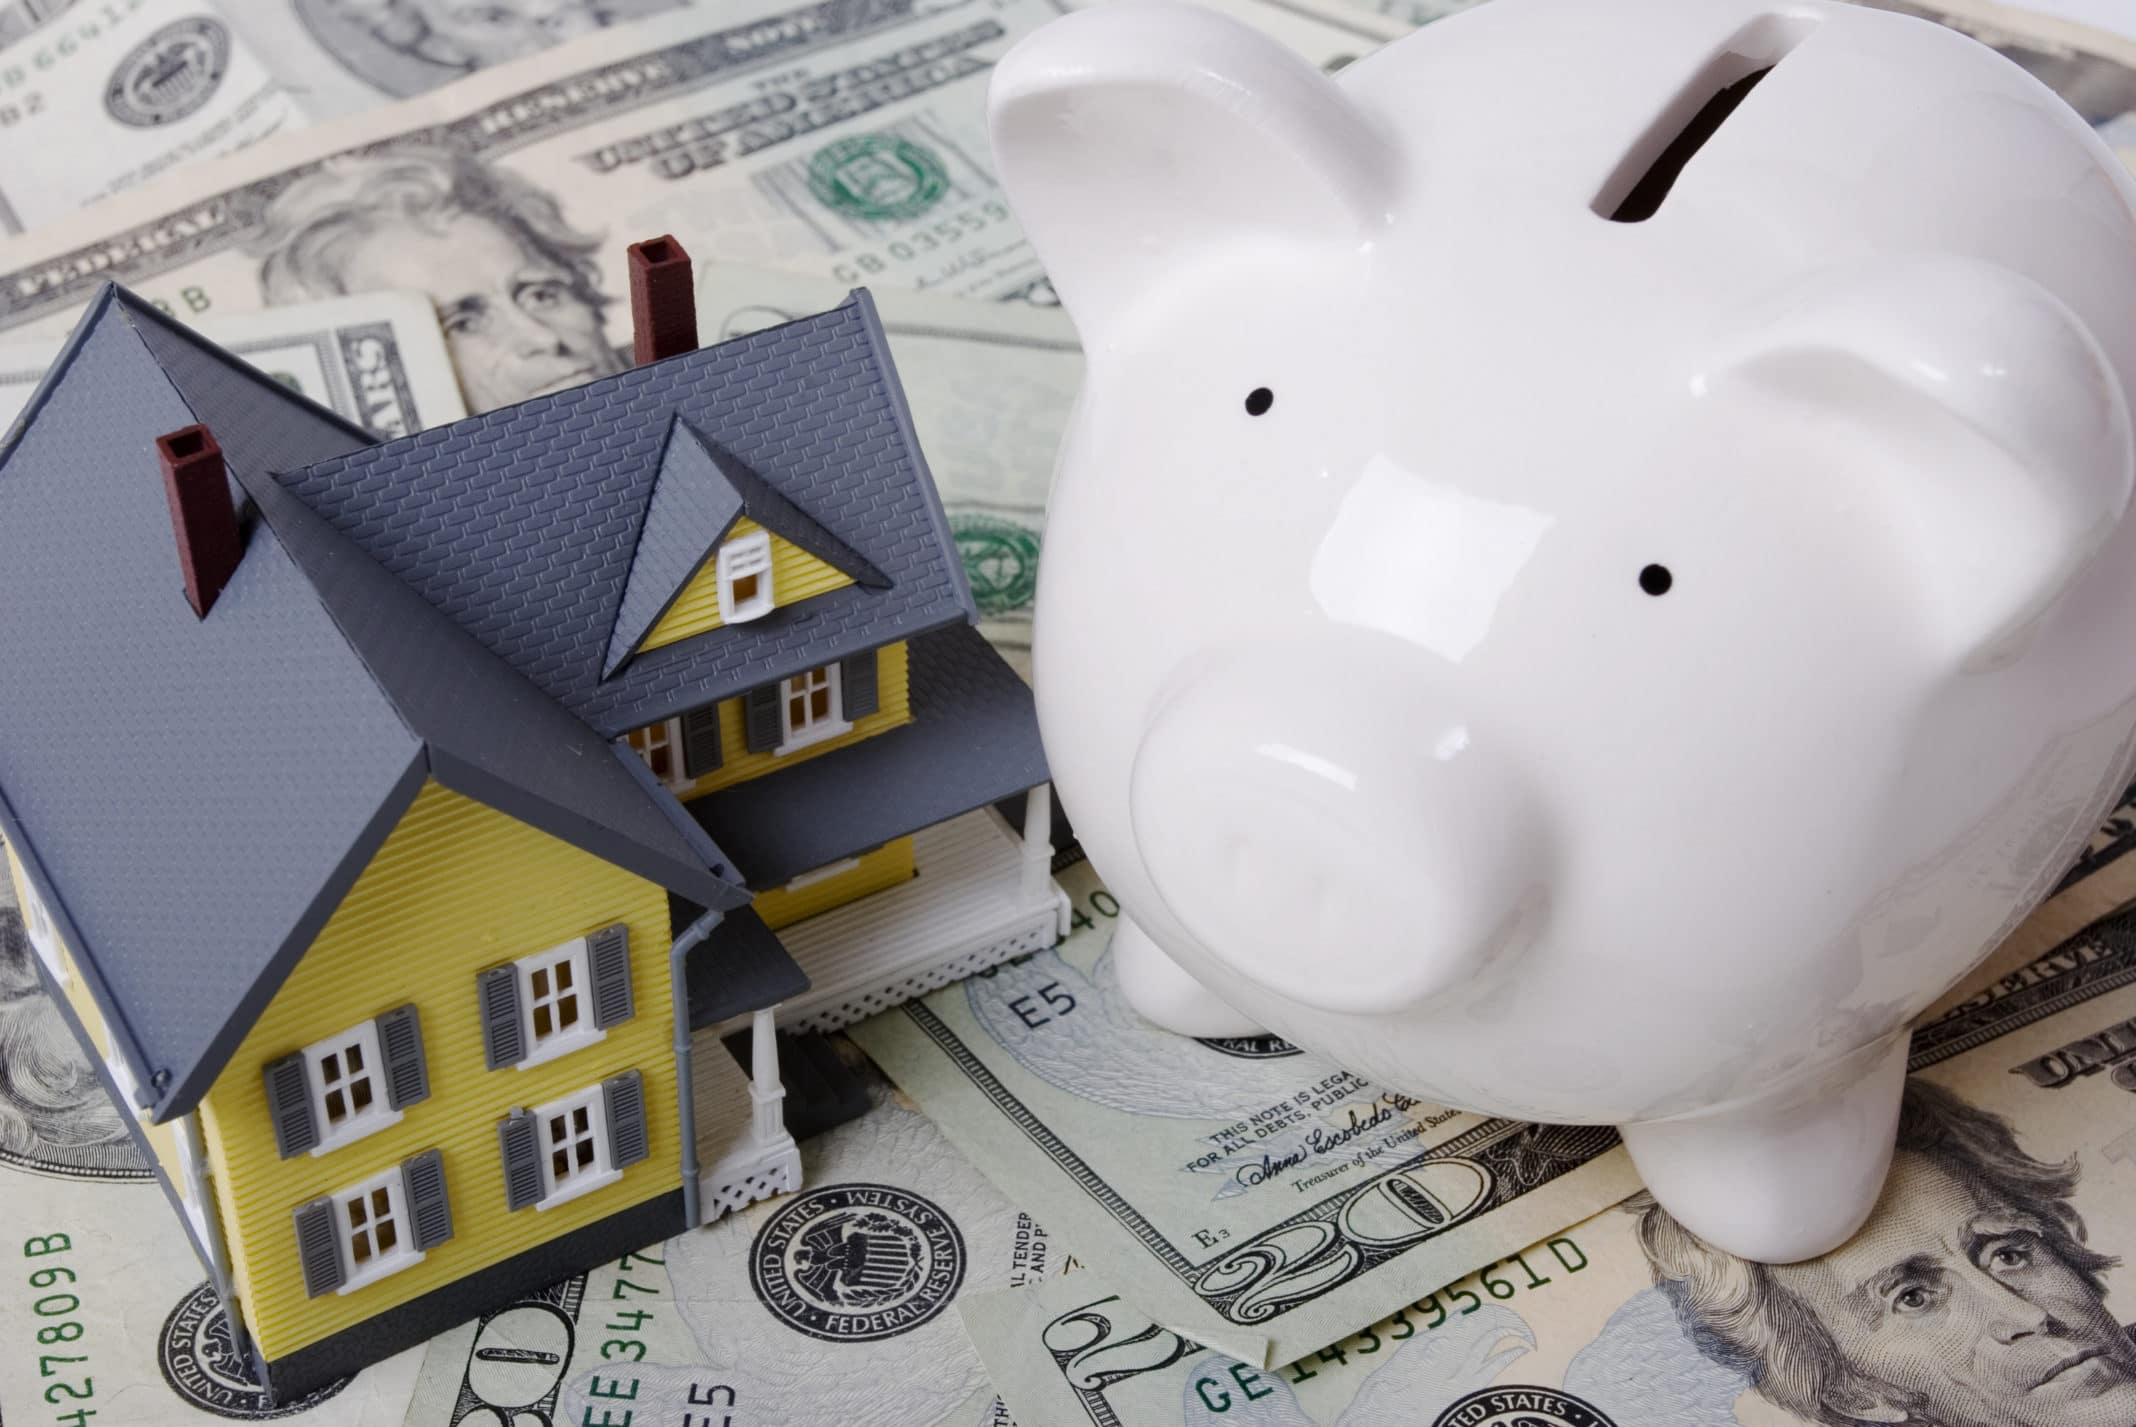 How to Withdraw from 401k or IRA for the Down Payment on a House